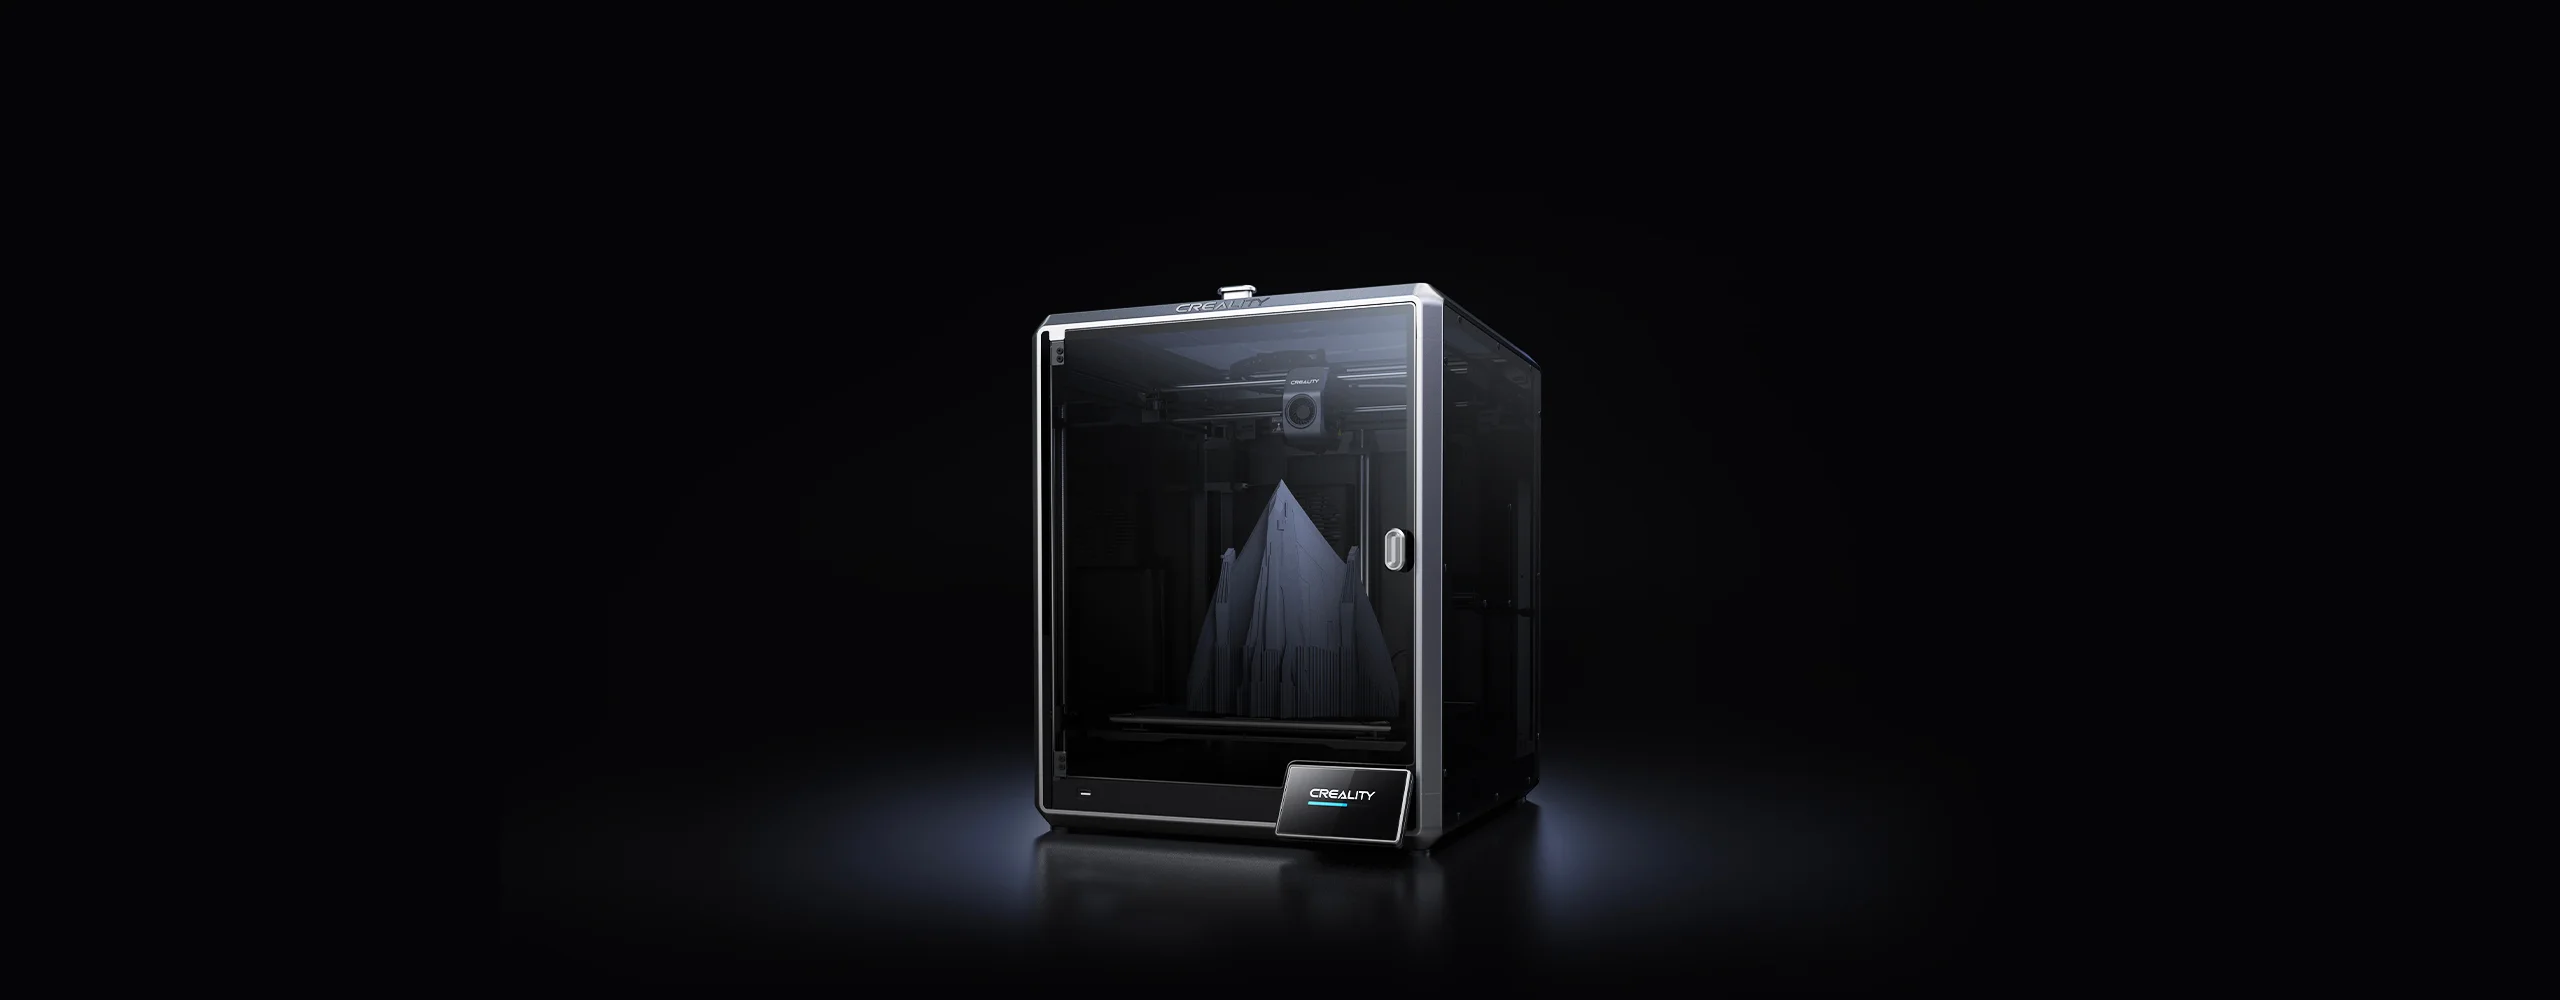 Practical with the Creality K1 Max 3D printer: As fast and reliable as it looks - 3DPrint.com